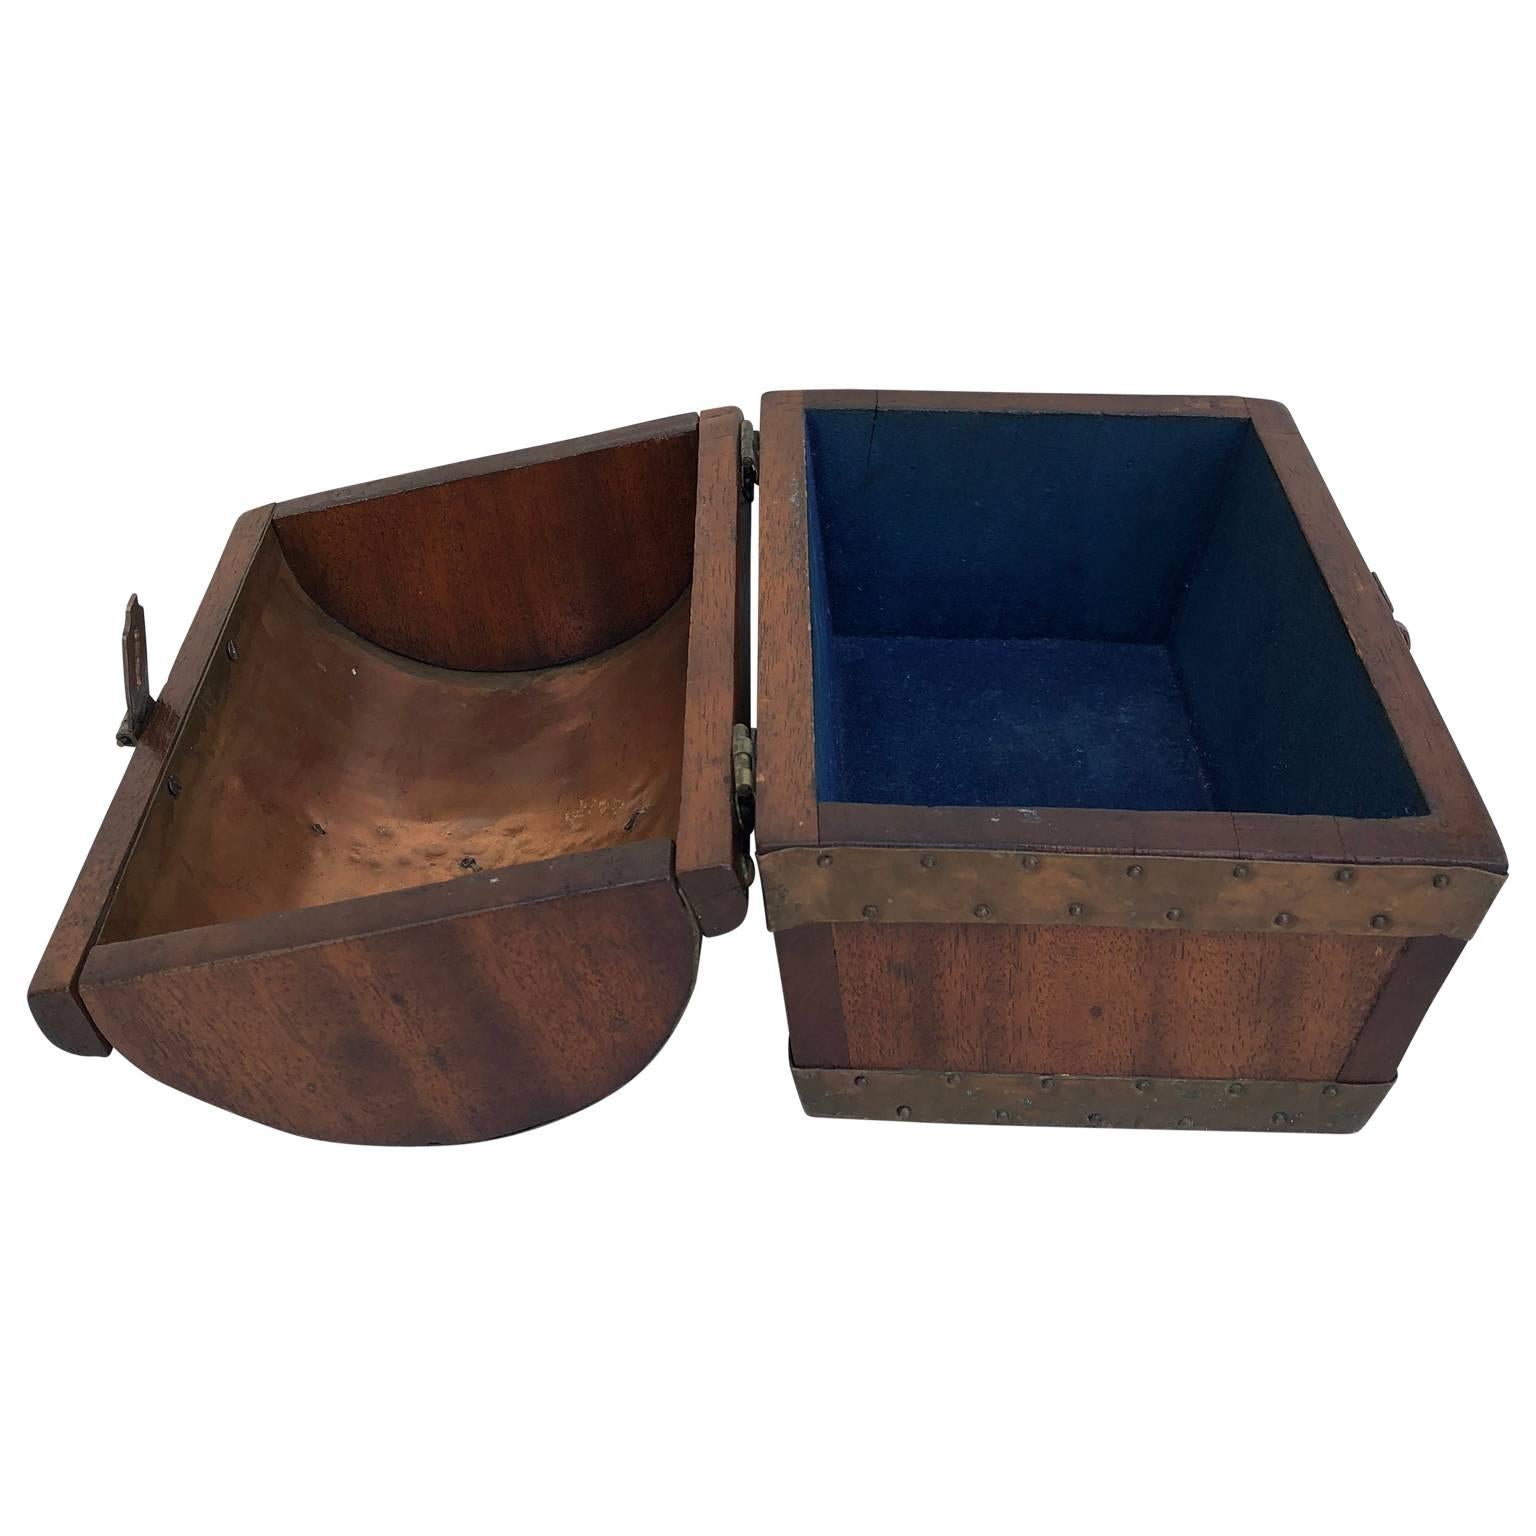 English Small Brass and Copper Plated Wooden Jewelry Casket